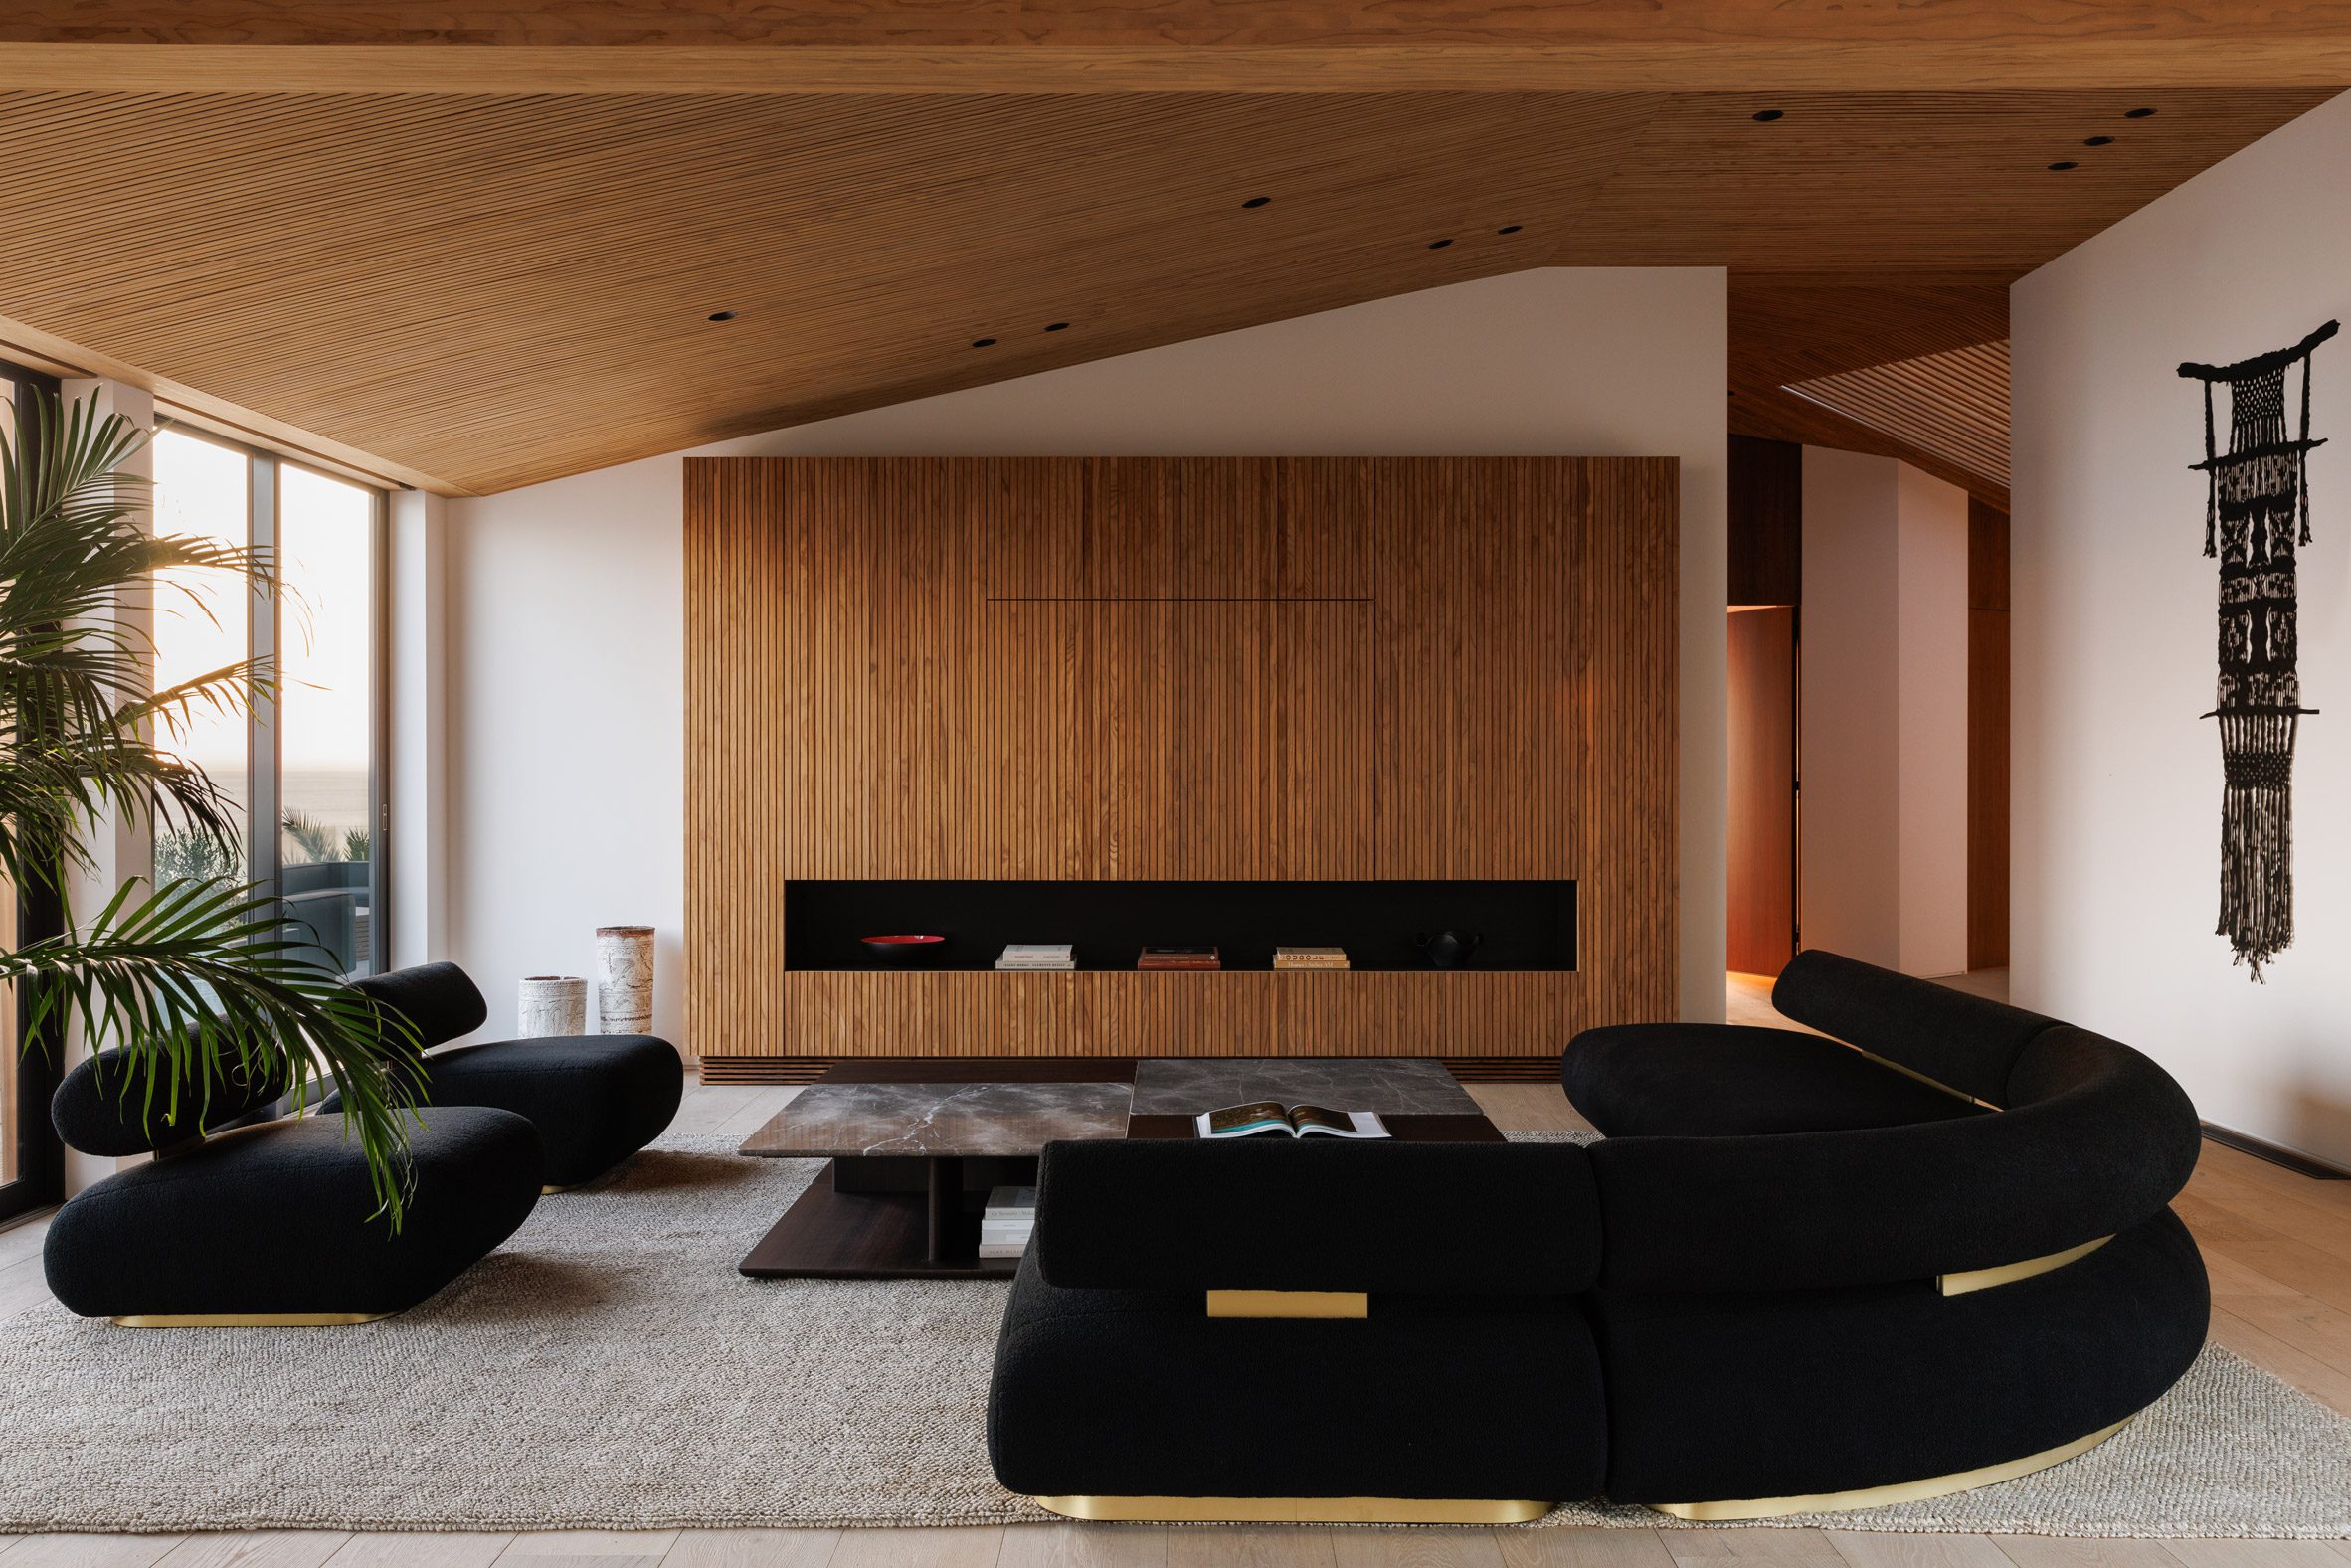 Lounge area featuring black seating and a slatted media unit